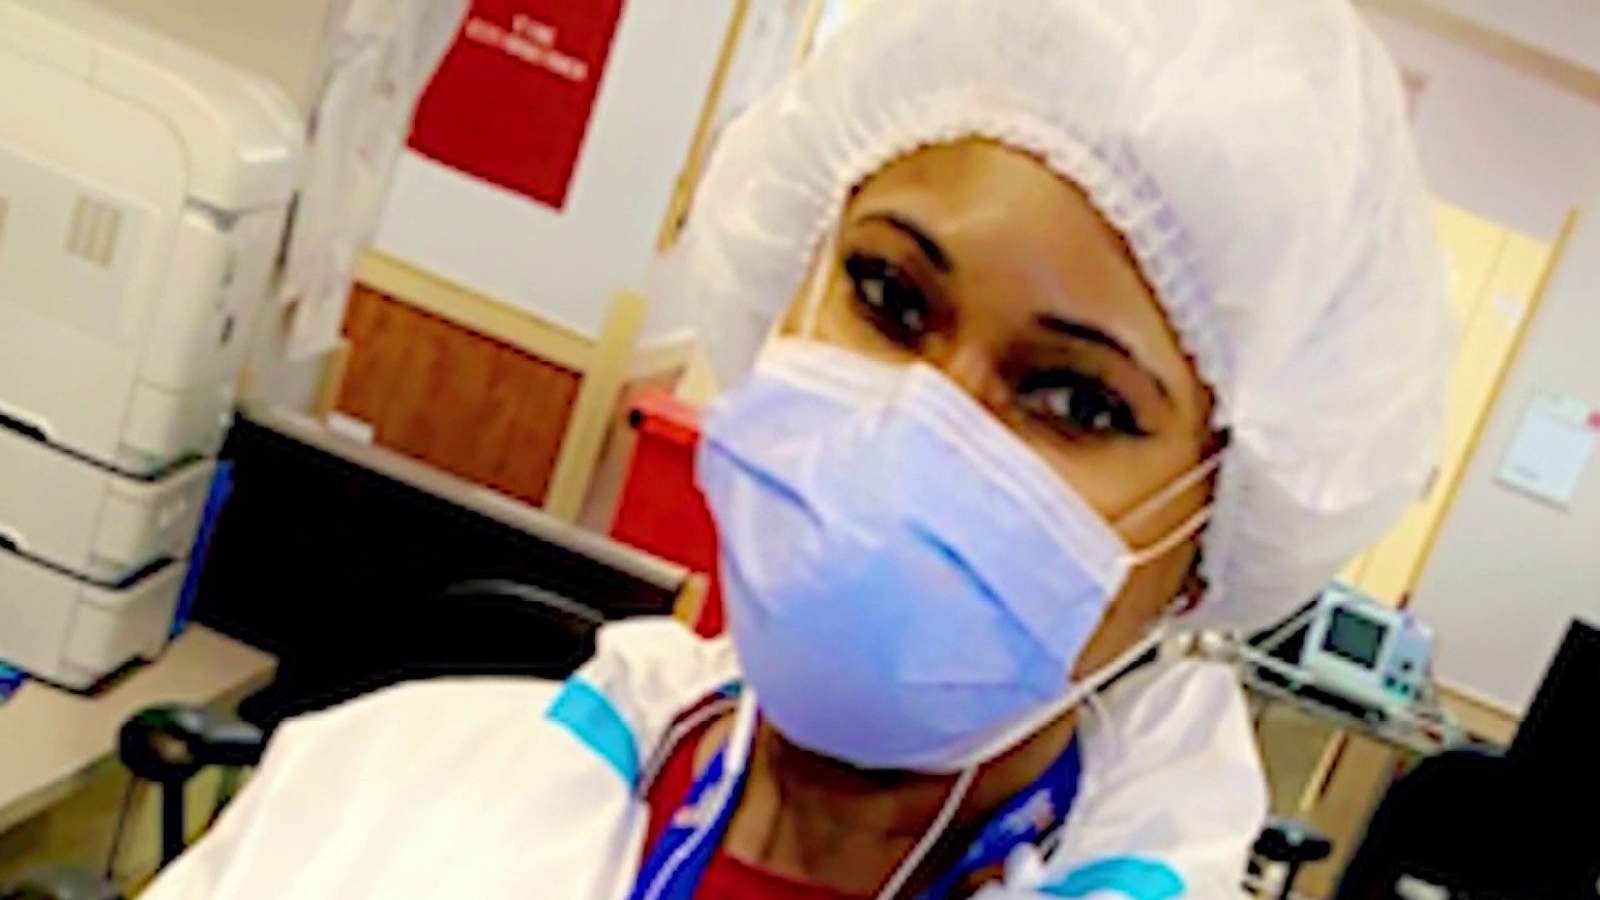 San Antonio nurse who fought on front lines in New York to aid Texas' COVID-19 fight